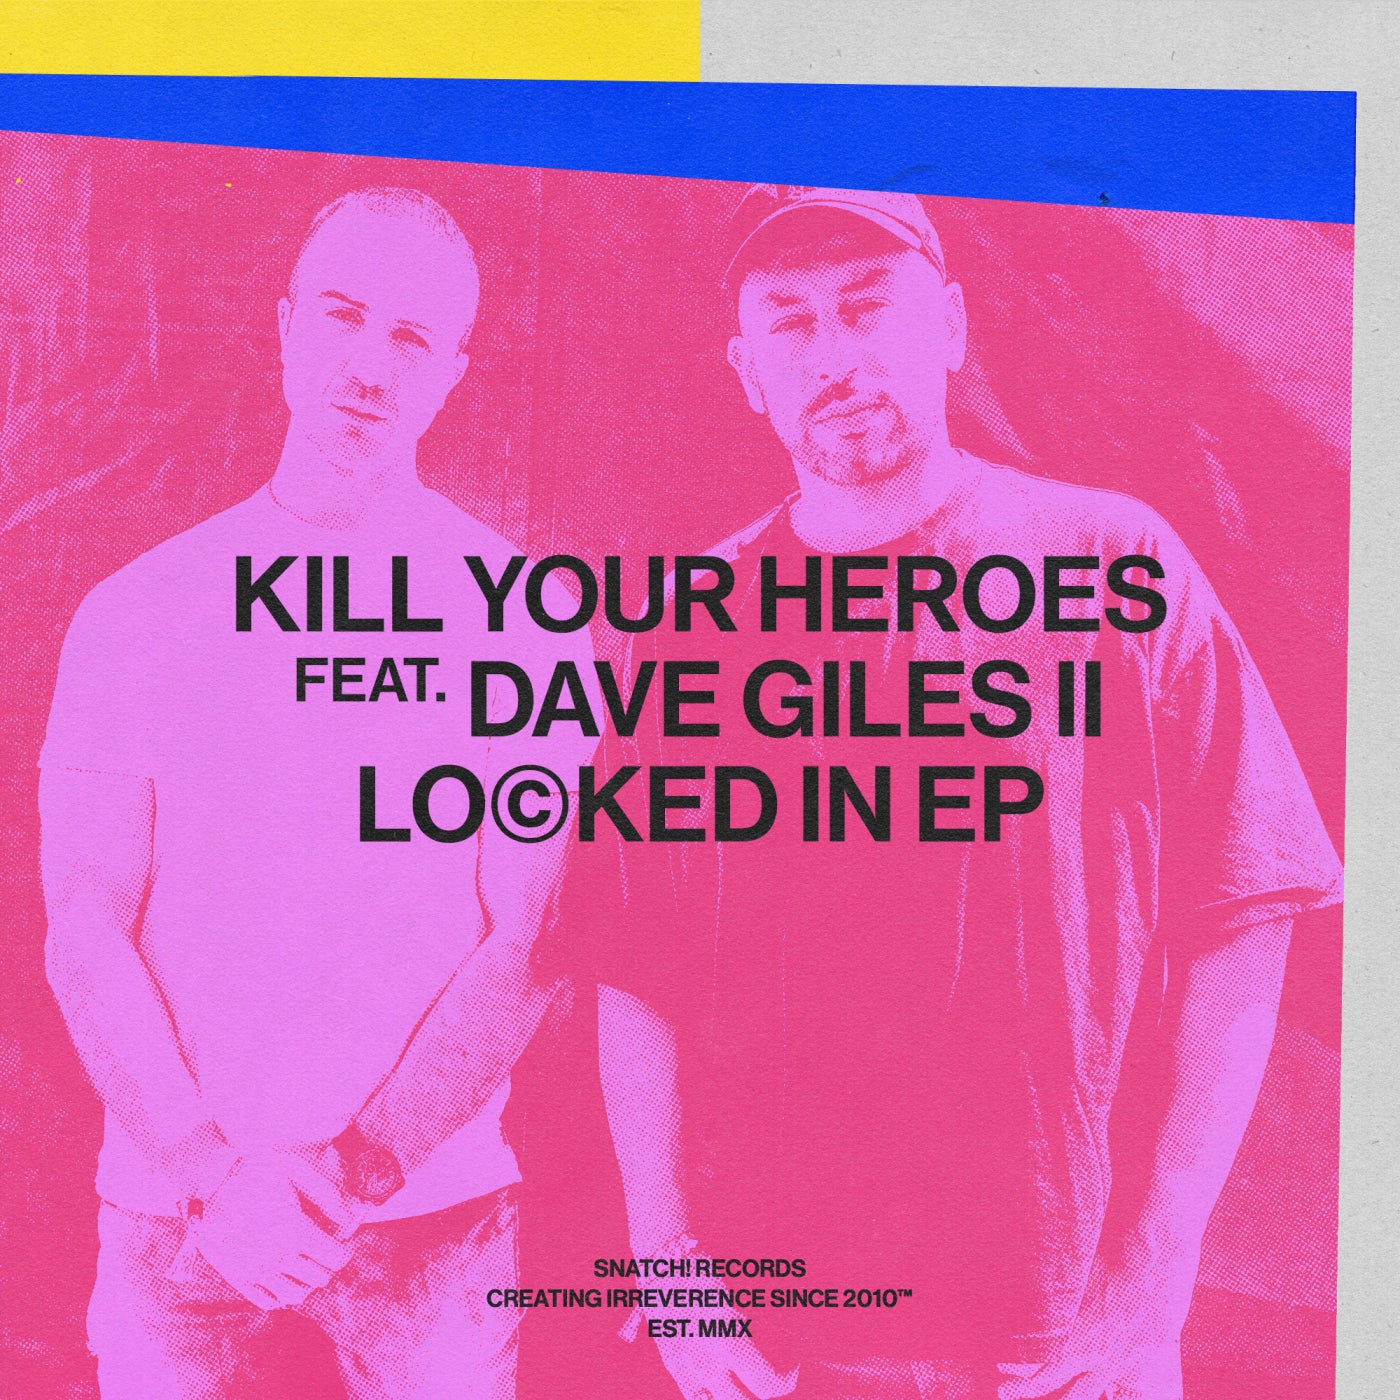 Kill Your Heroes, Dave Giles II - Locked In EP [SNATCH156]